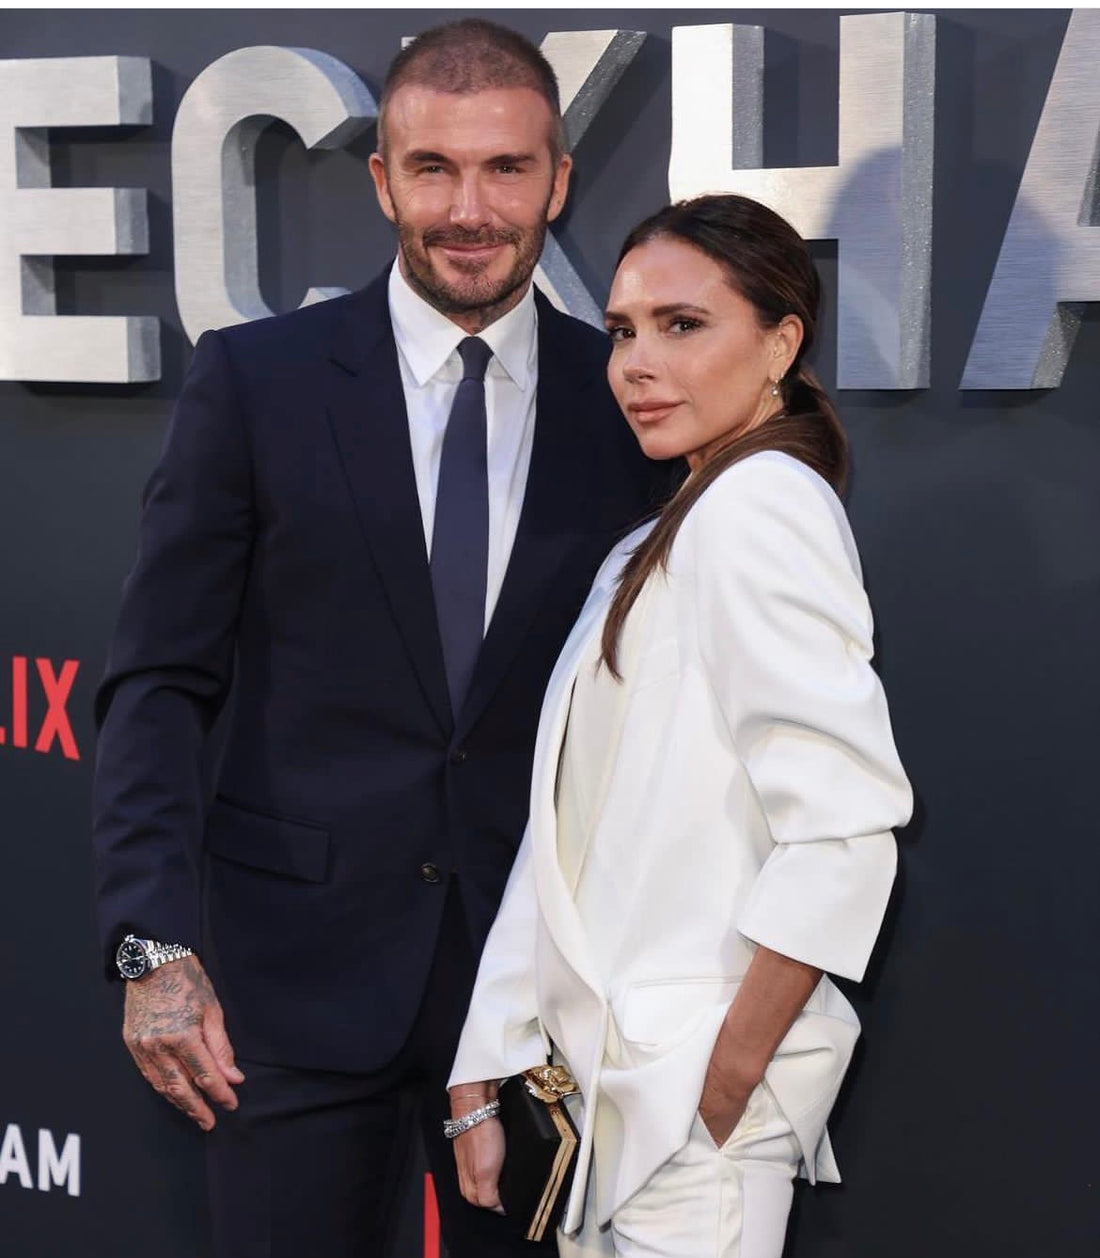 Victoria Beckham: The Resilient Woman Behind the Icon